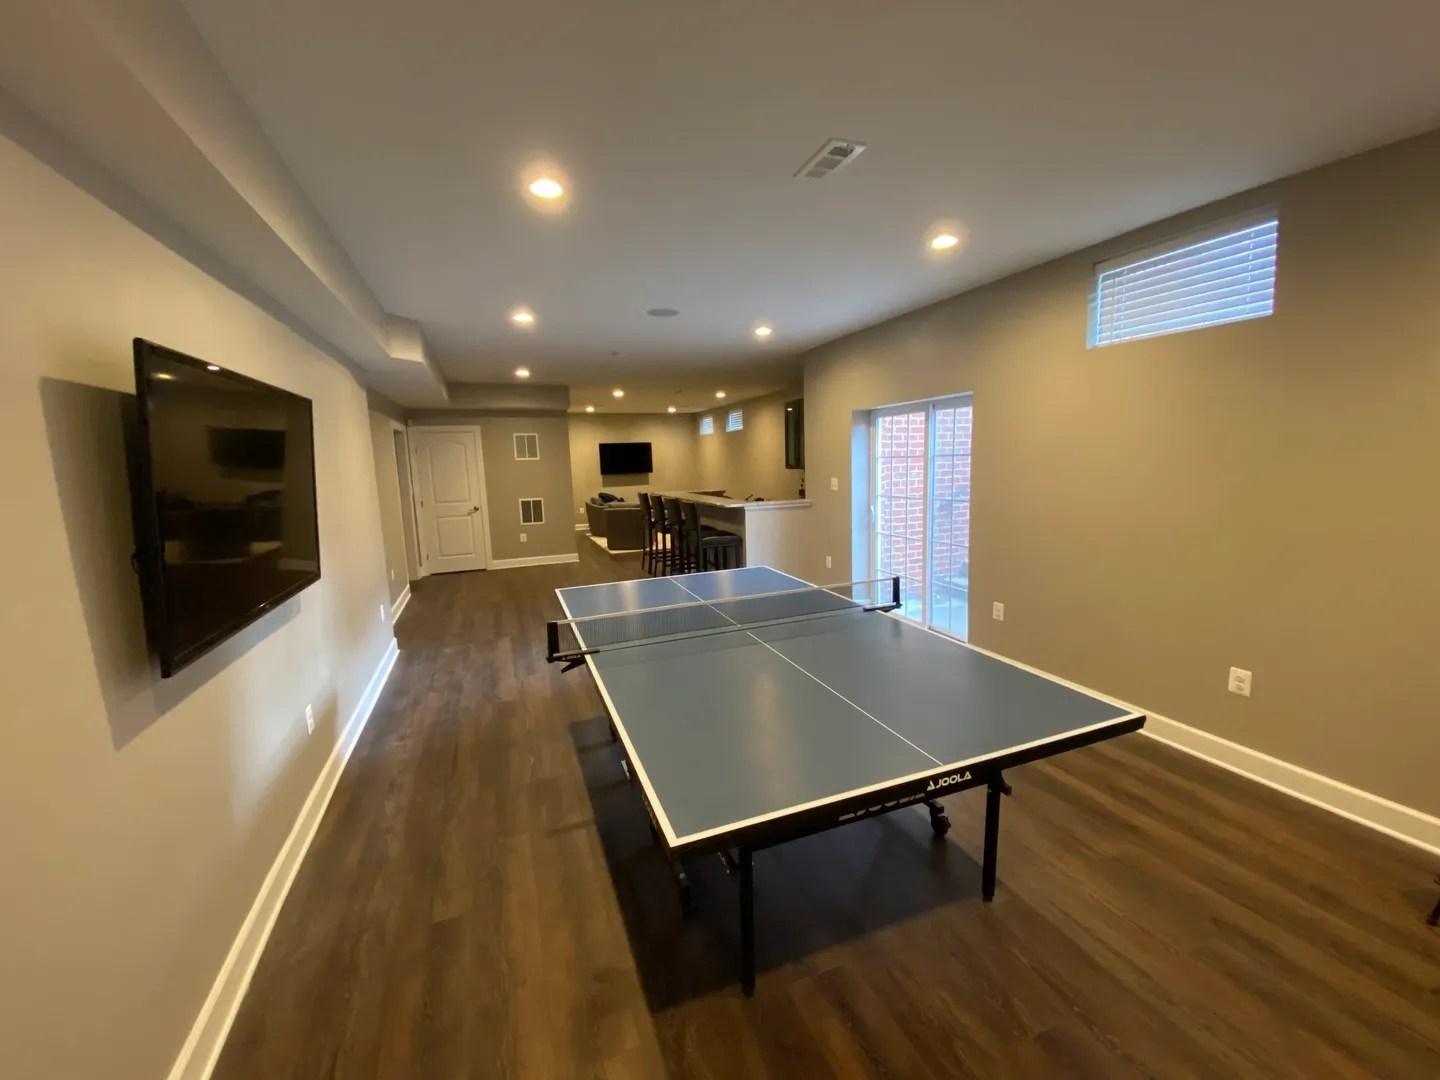 A ping pong table in the middle of a room.